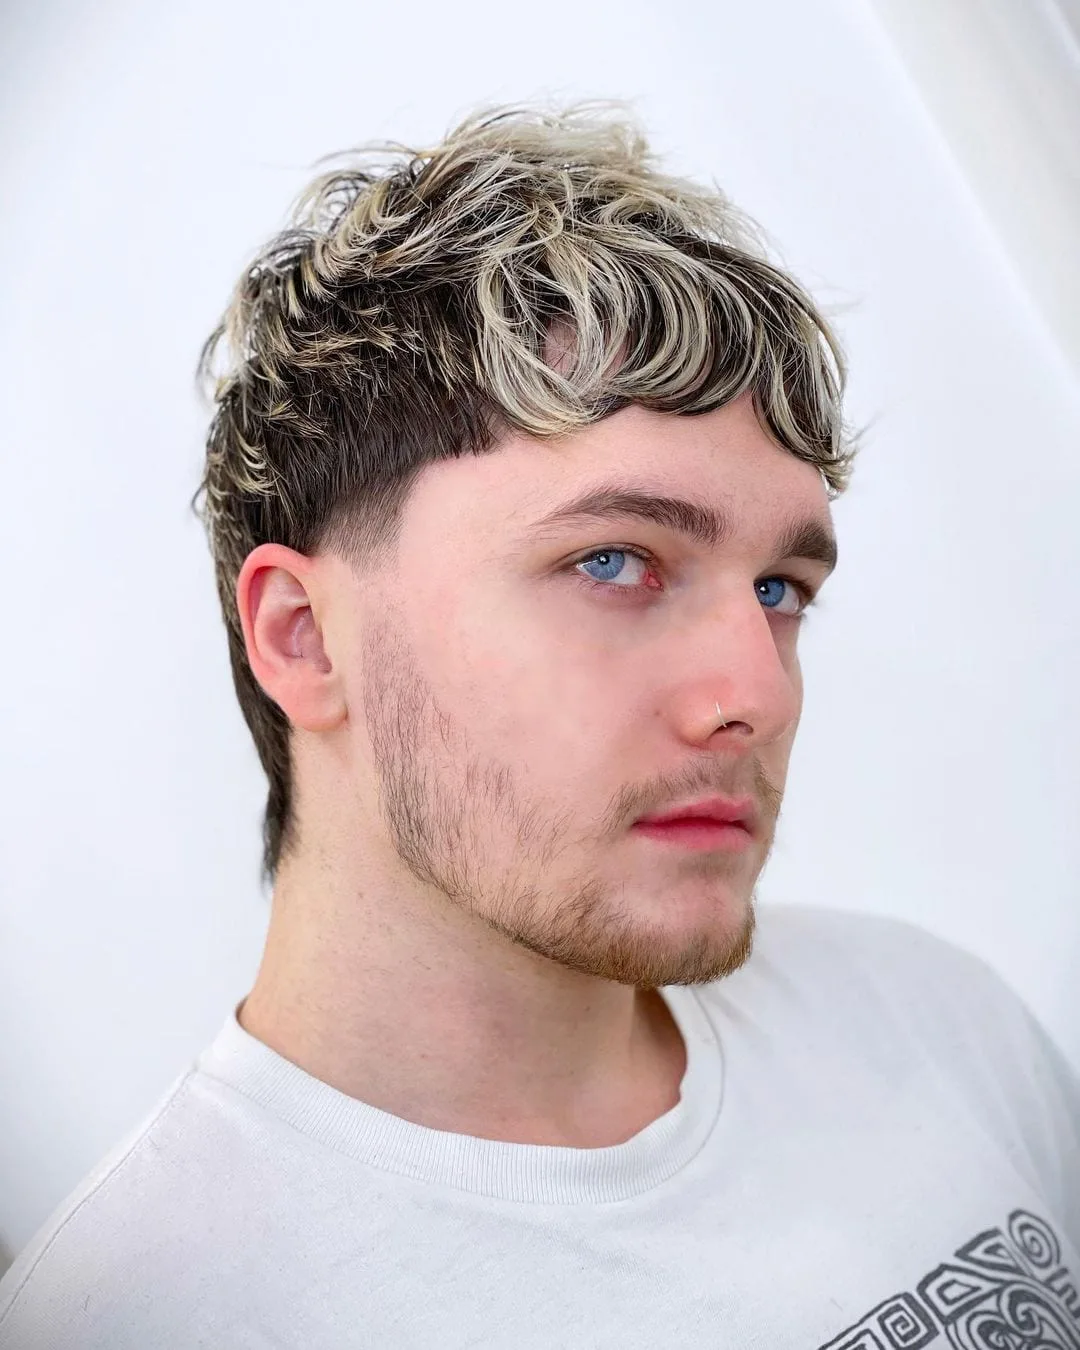 Man with steeley blue eyes and a mullet haircut and bleached top